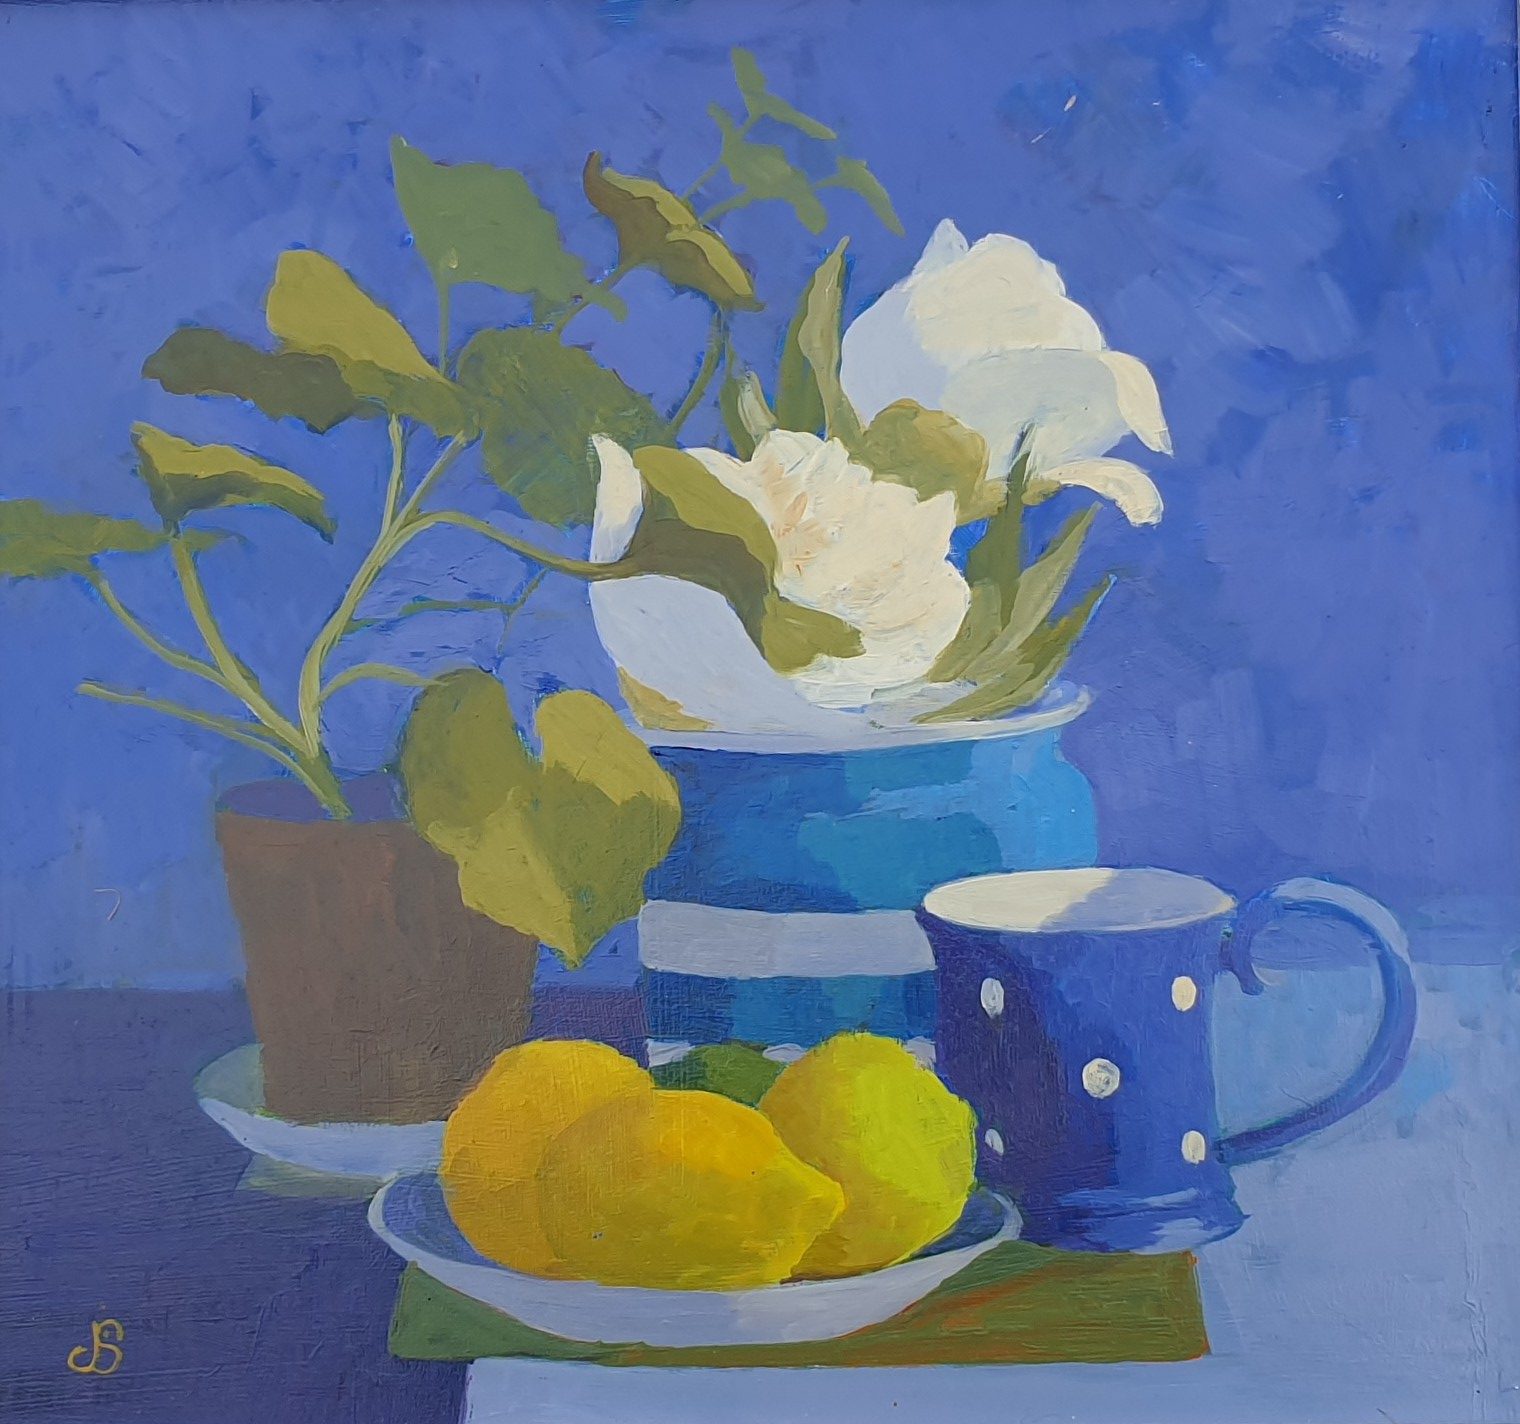 Painting of a still life in blue